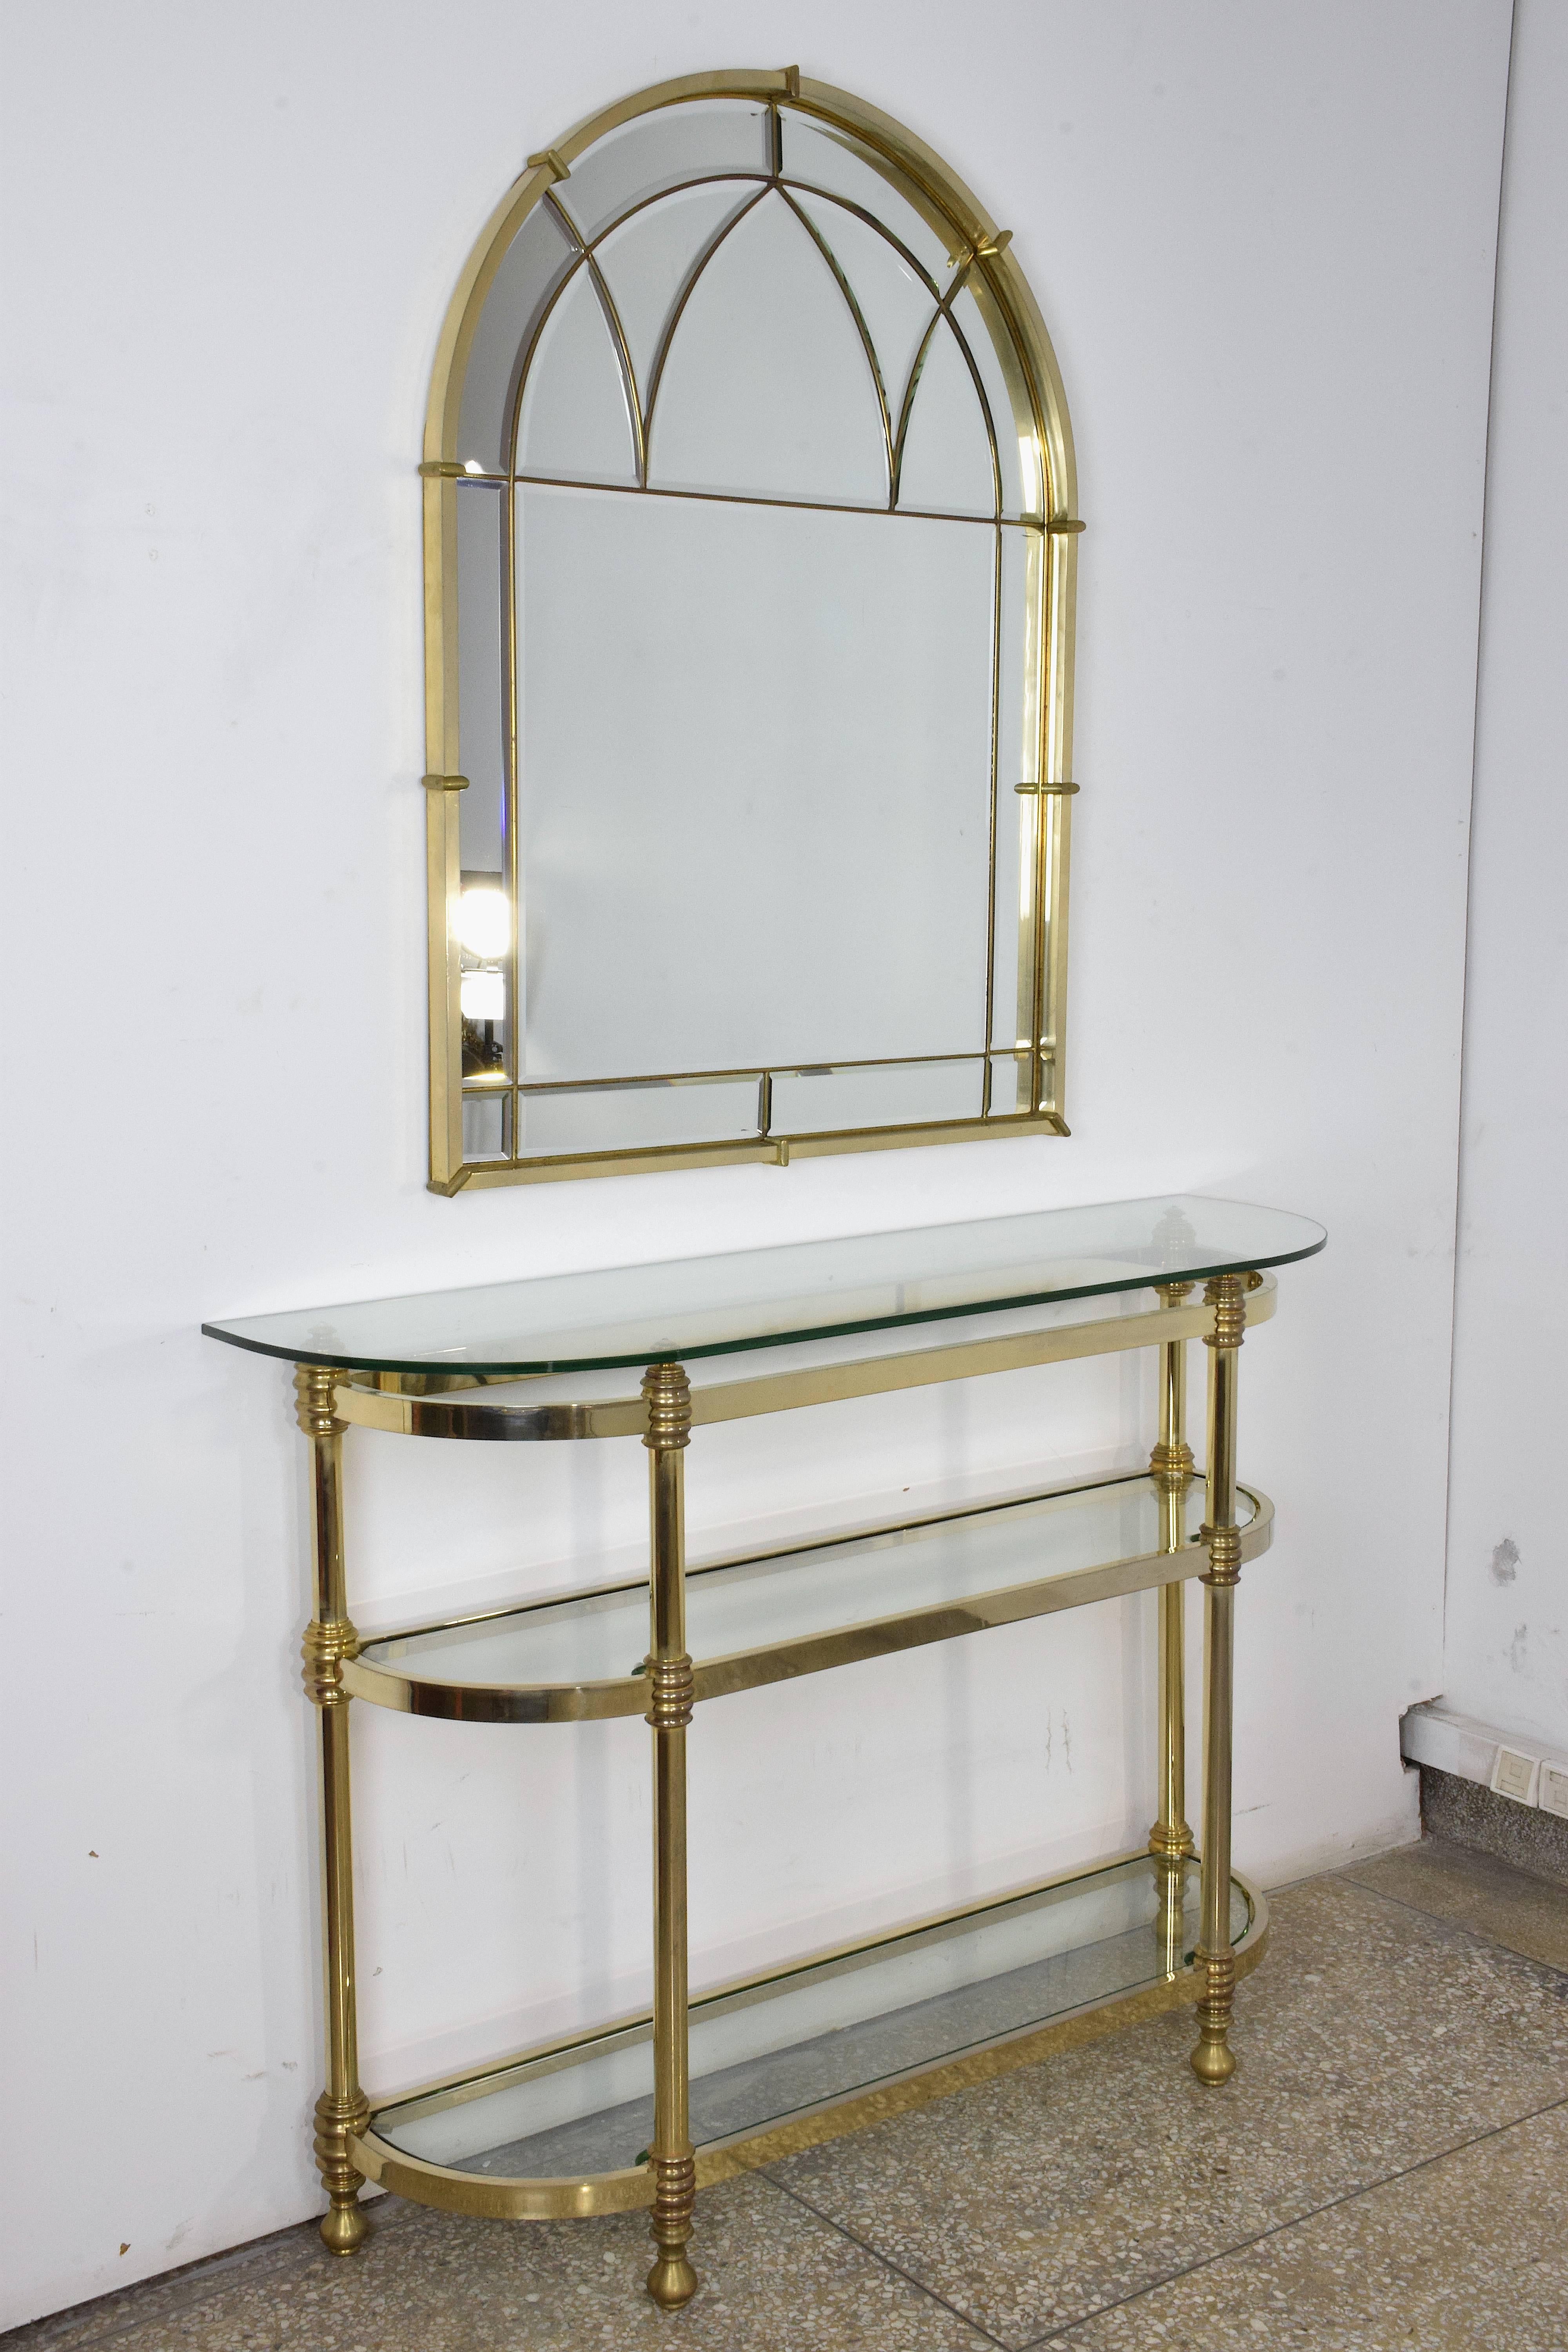 20th century vintage wall mirror and console set in hollywood regency style. The 16 beveled mirrors are joined by solid varnished brass to form beautiful curves and arches. The polished brass console table is designed with three glass shelves.